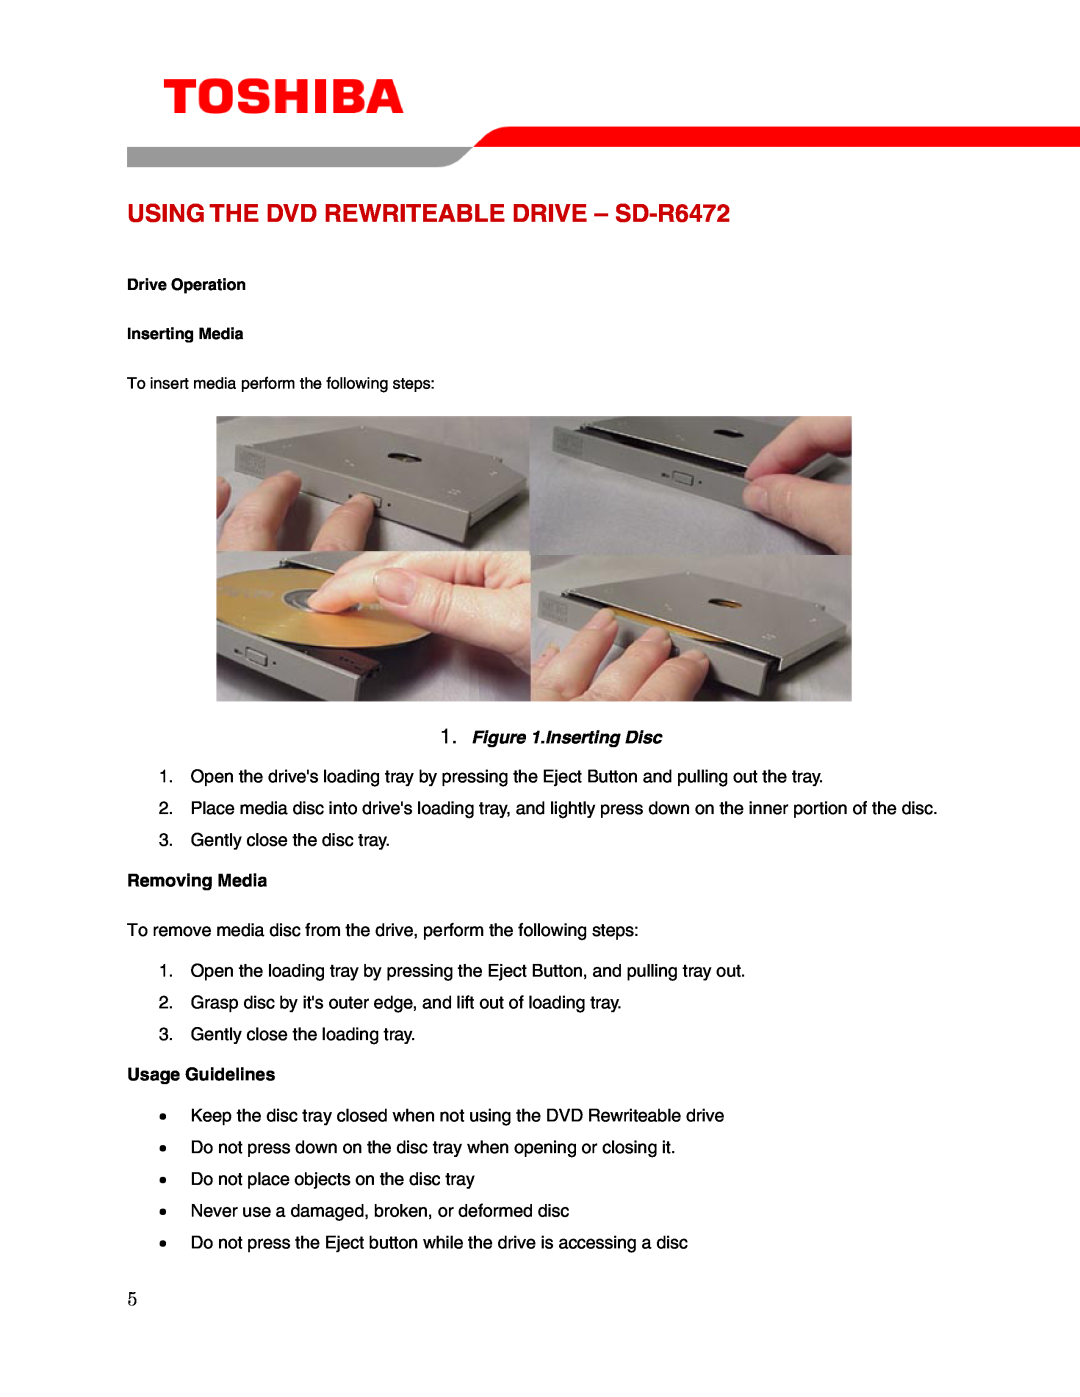 Toshiba user manual USING THE DVD REWRITEABLE DRIVE - SD-R6472, Inserting Disc, Removing Media, Usage Guidelines 